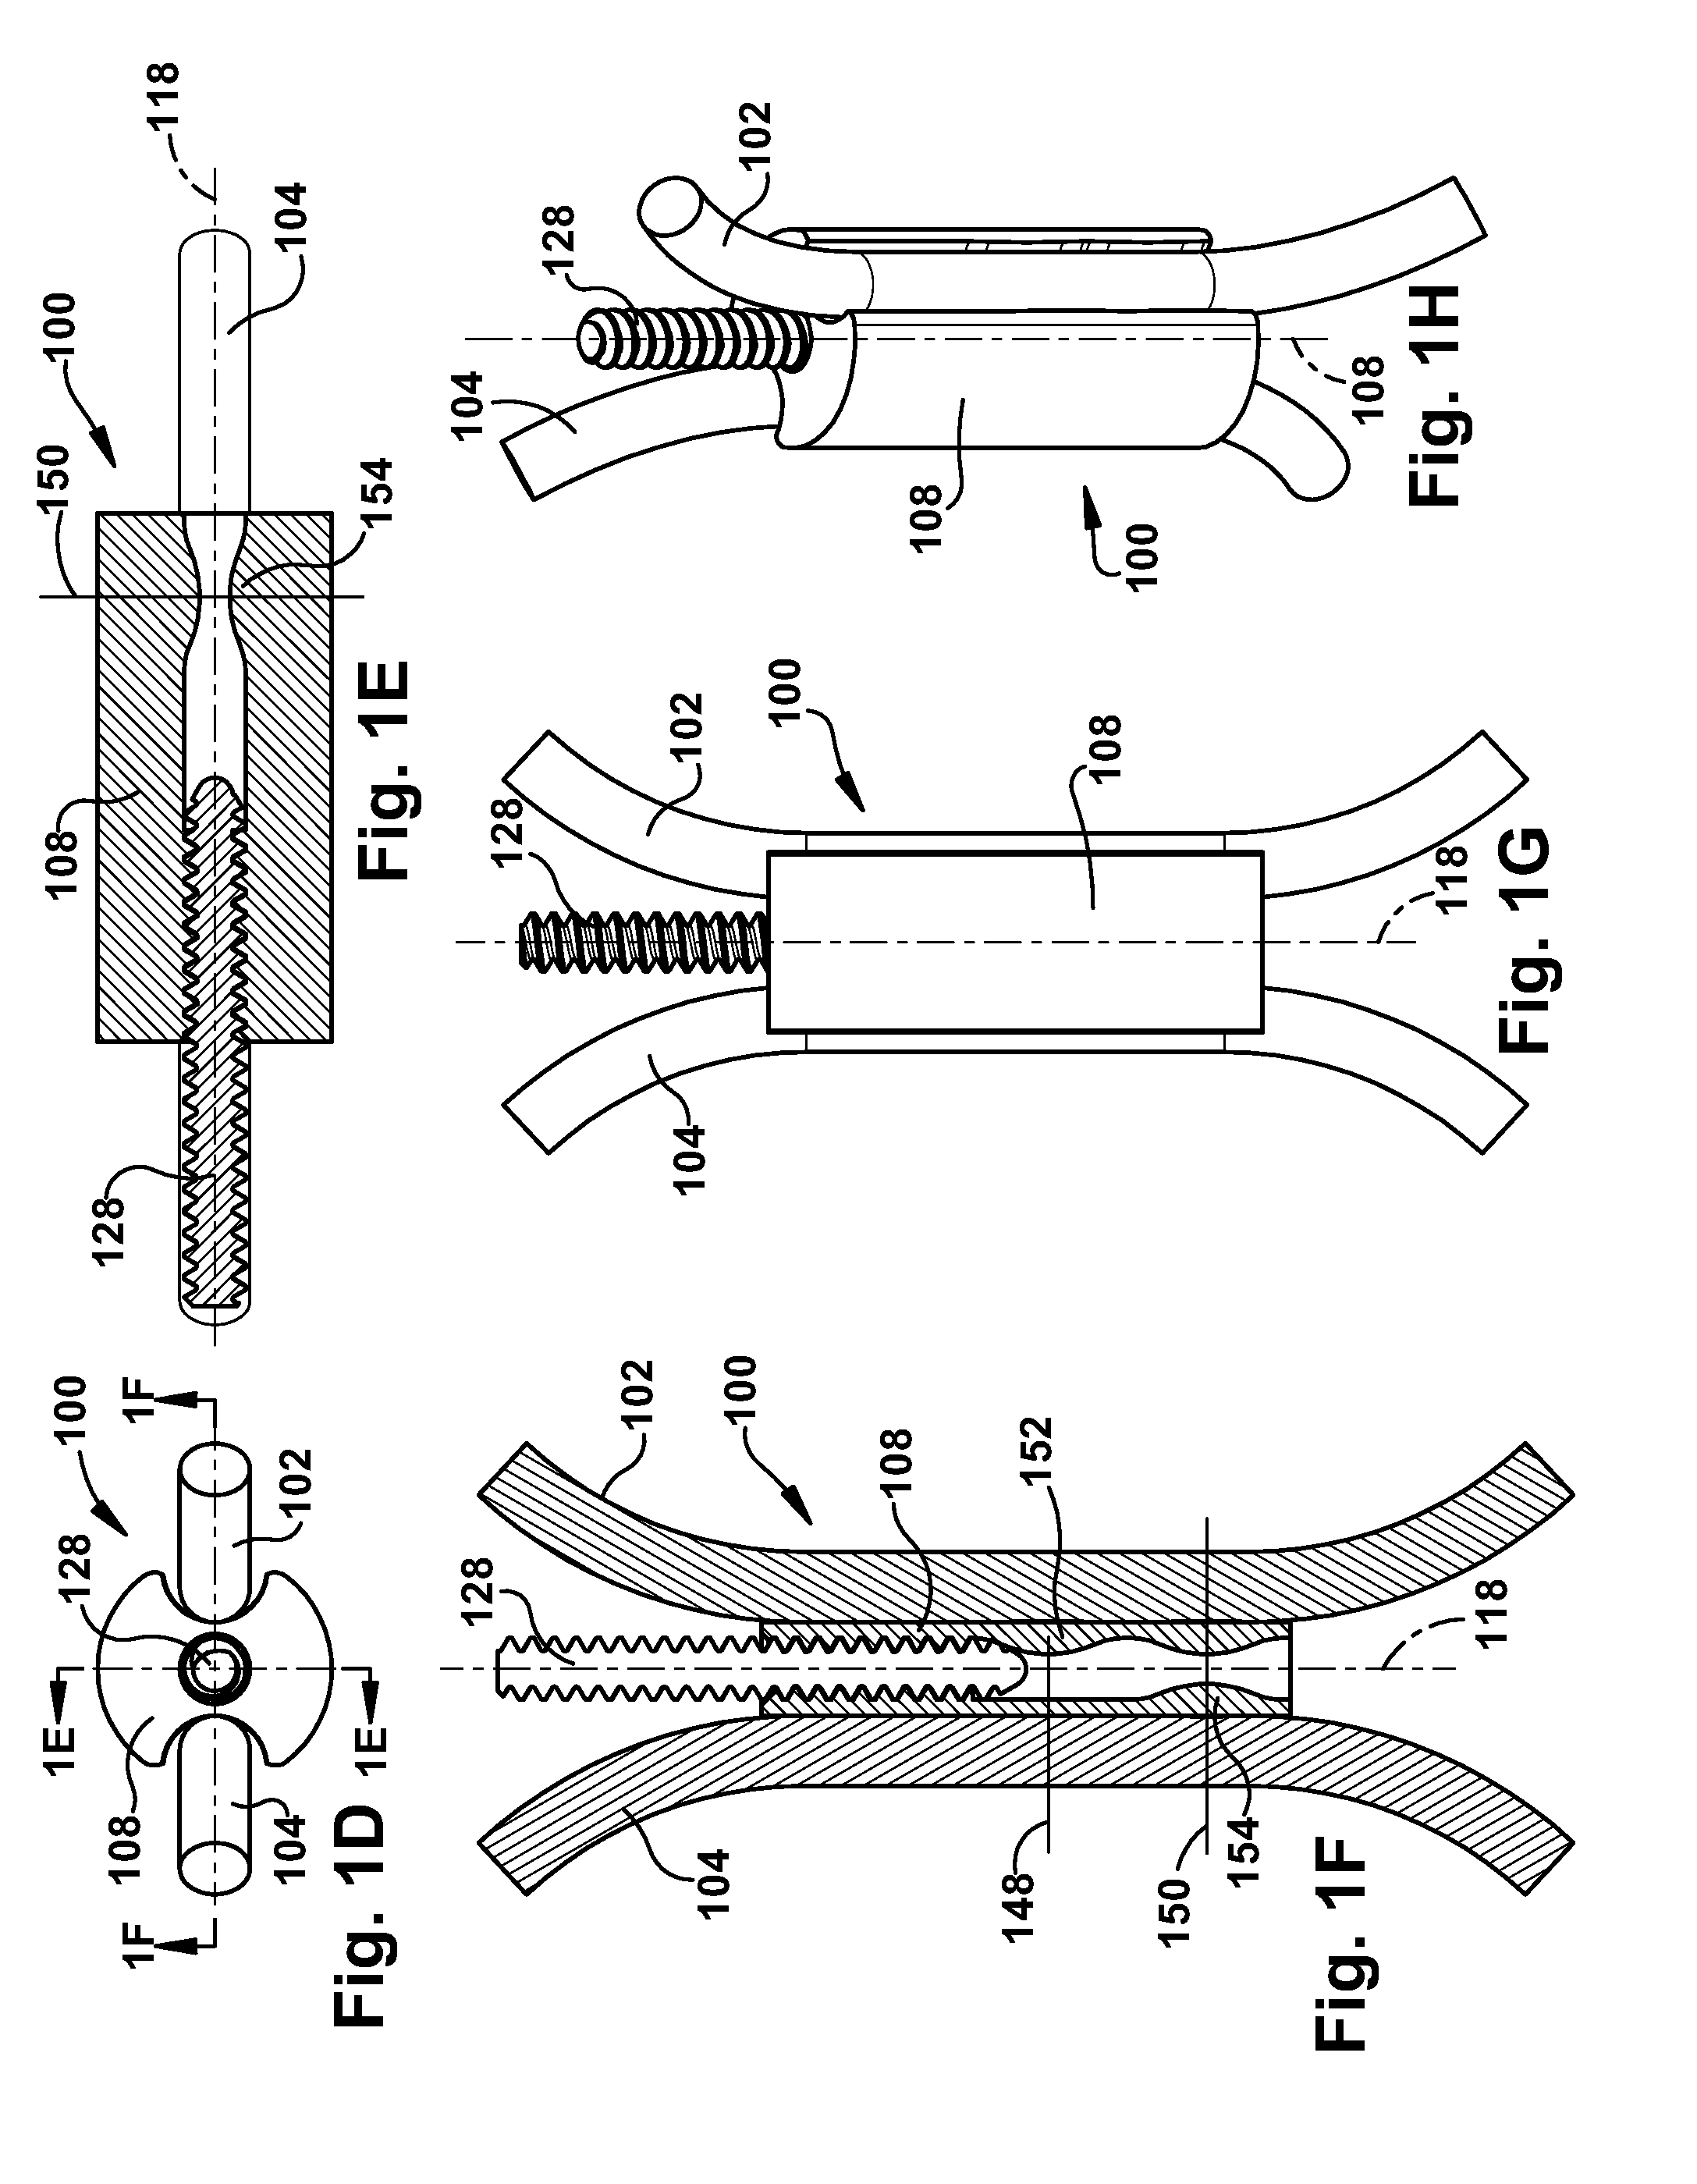 Apparatus and method for sequentially anchoring multiple graft ligaments in a bone tunnel